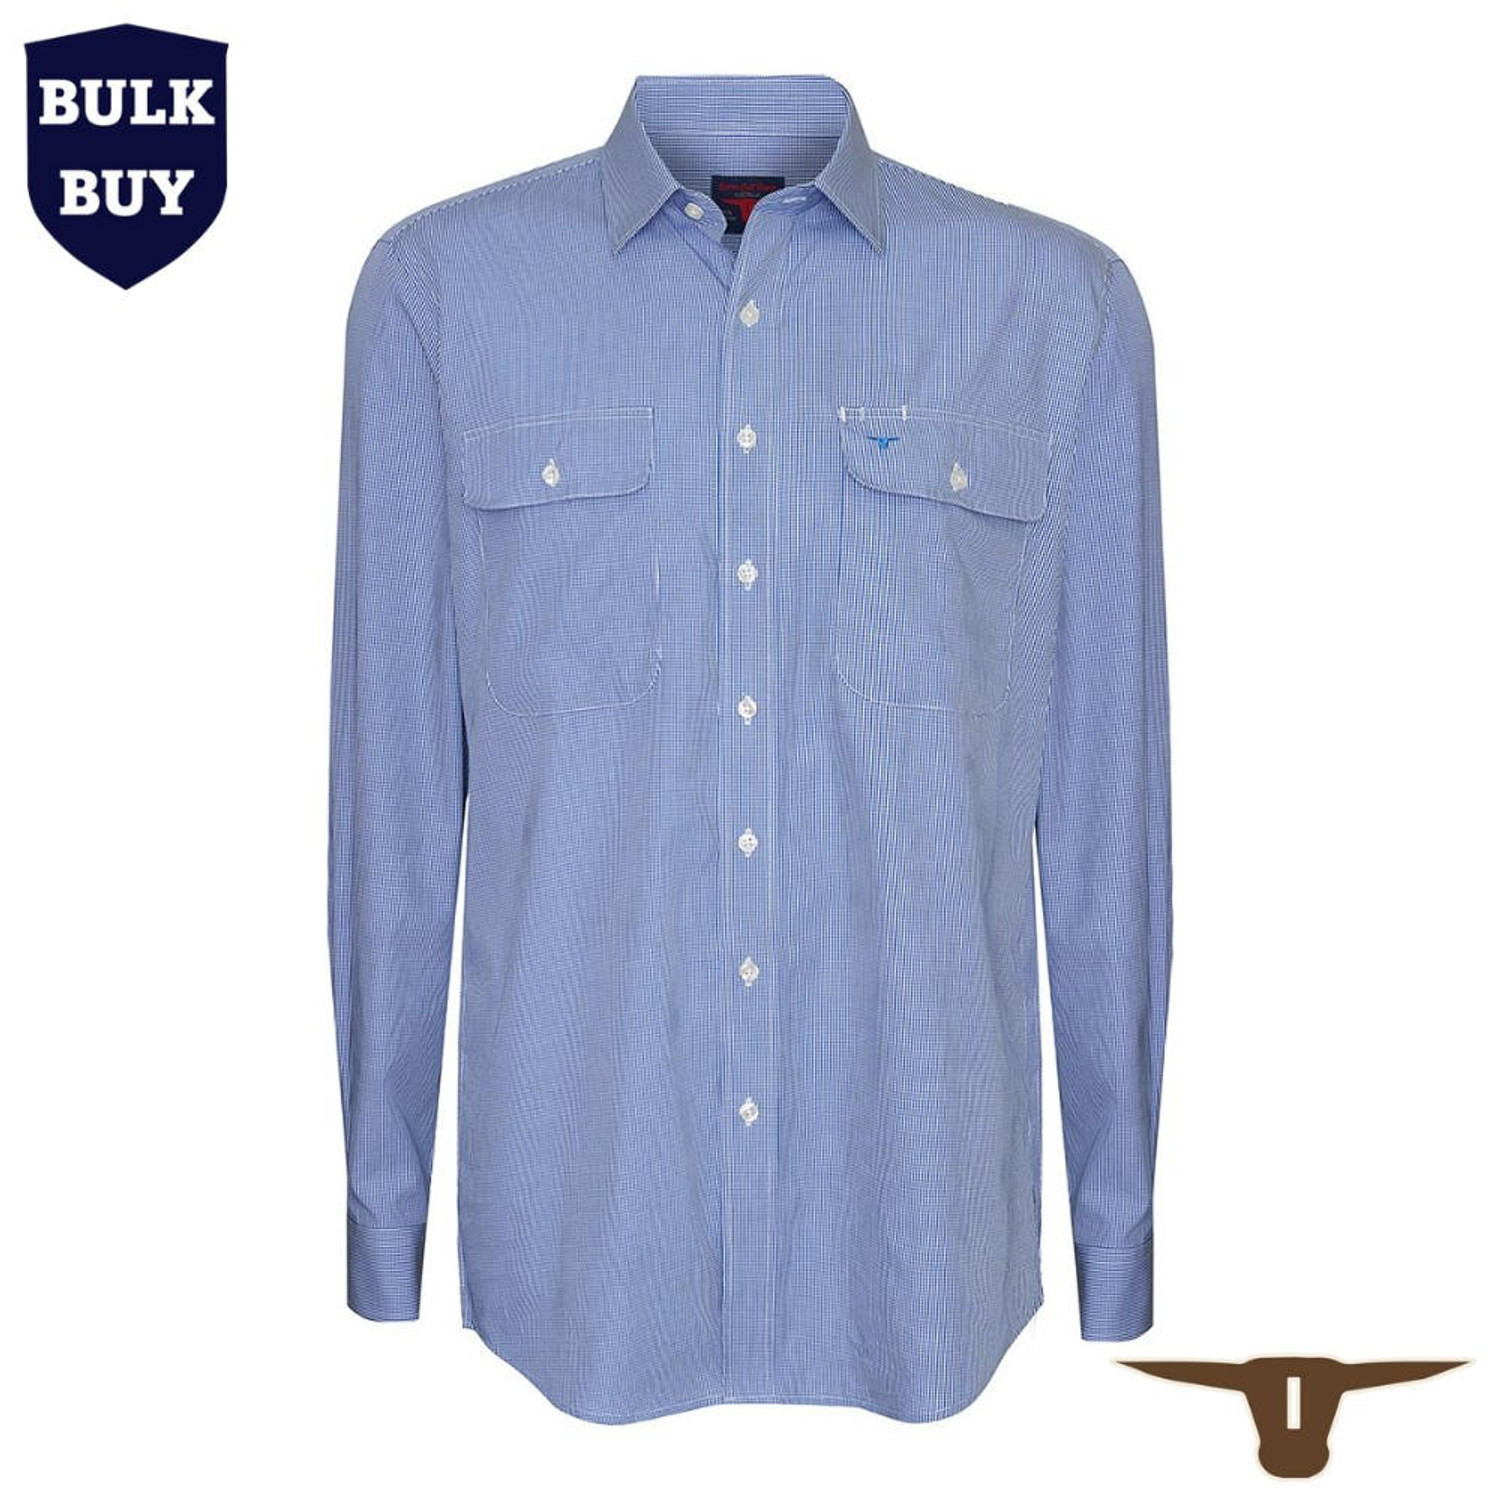  Born Out Here Mens Long Sleeve Open Front Shirt in Royal/White Mini Check (Bulk Deal Buy 4+ for $89.95 each) 